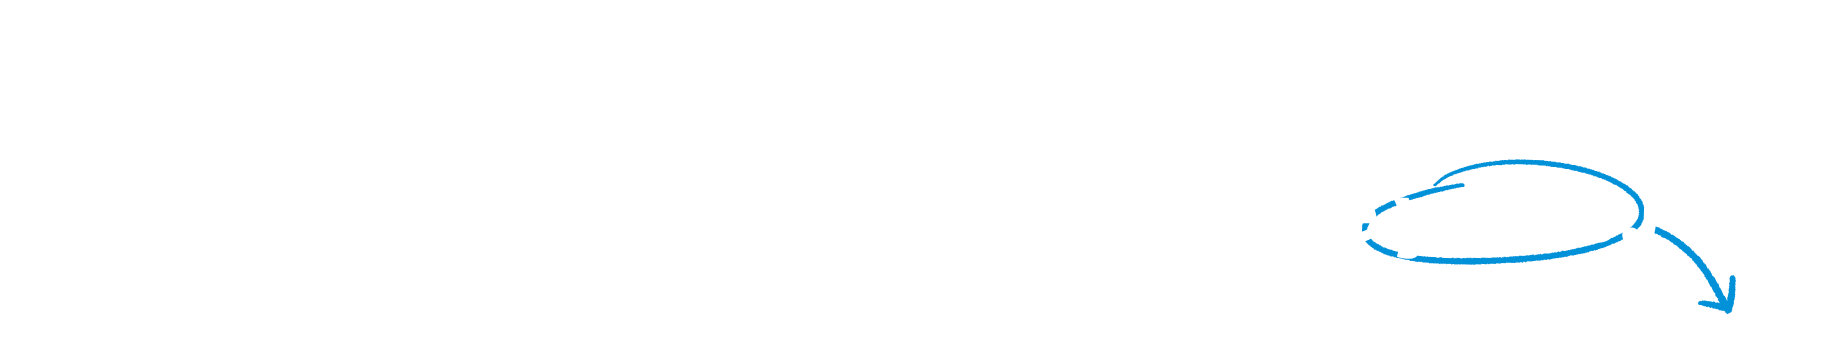 See the impact SmartDollar has on employees and businesses like yours. 